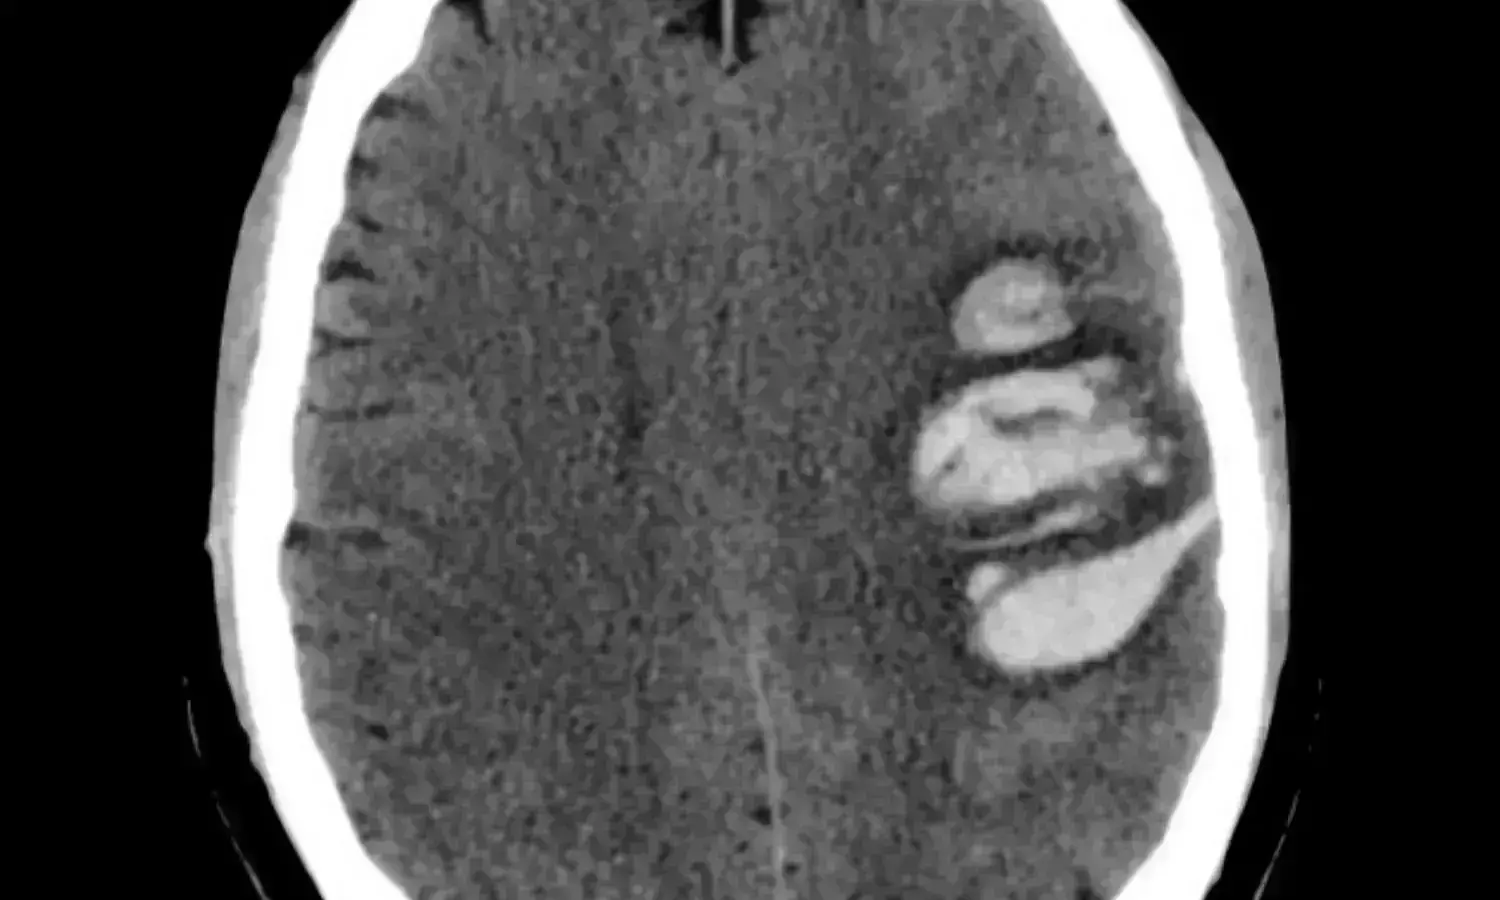 Early minimally invasive hematoma evacuation improves outcomes in acute intracerebral hemorrhage patients: NEJM